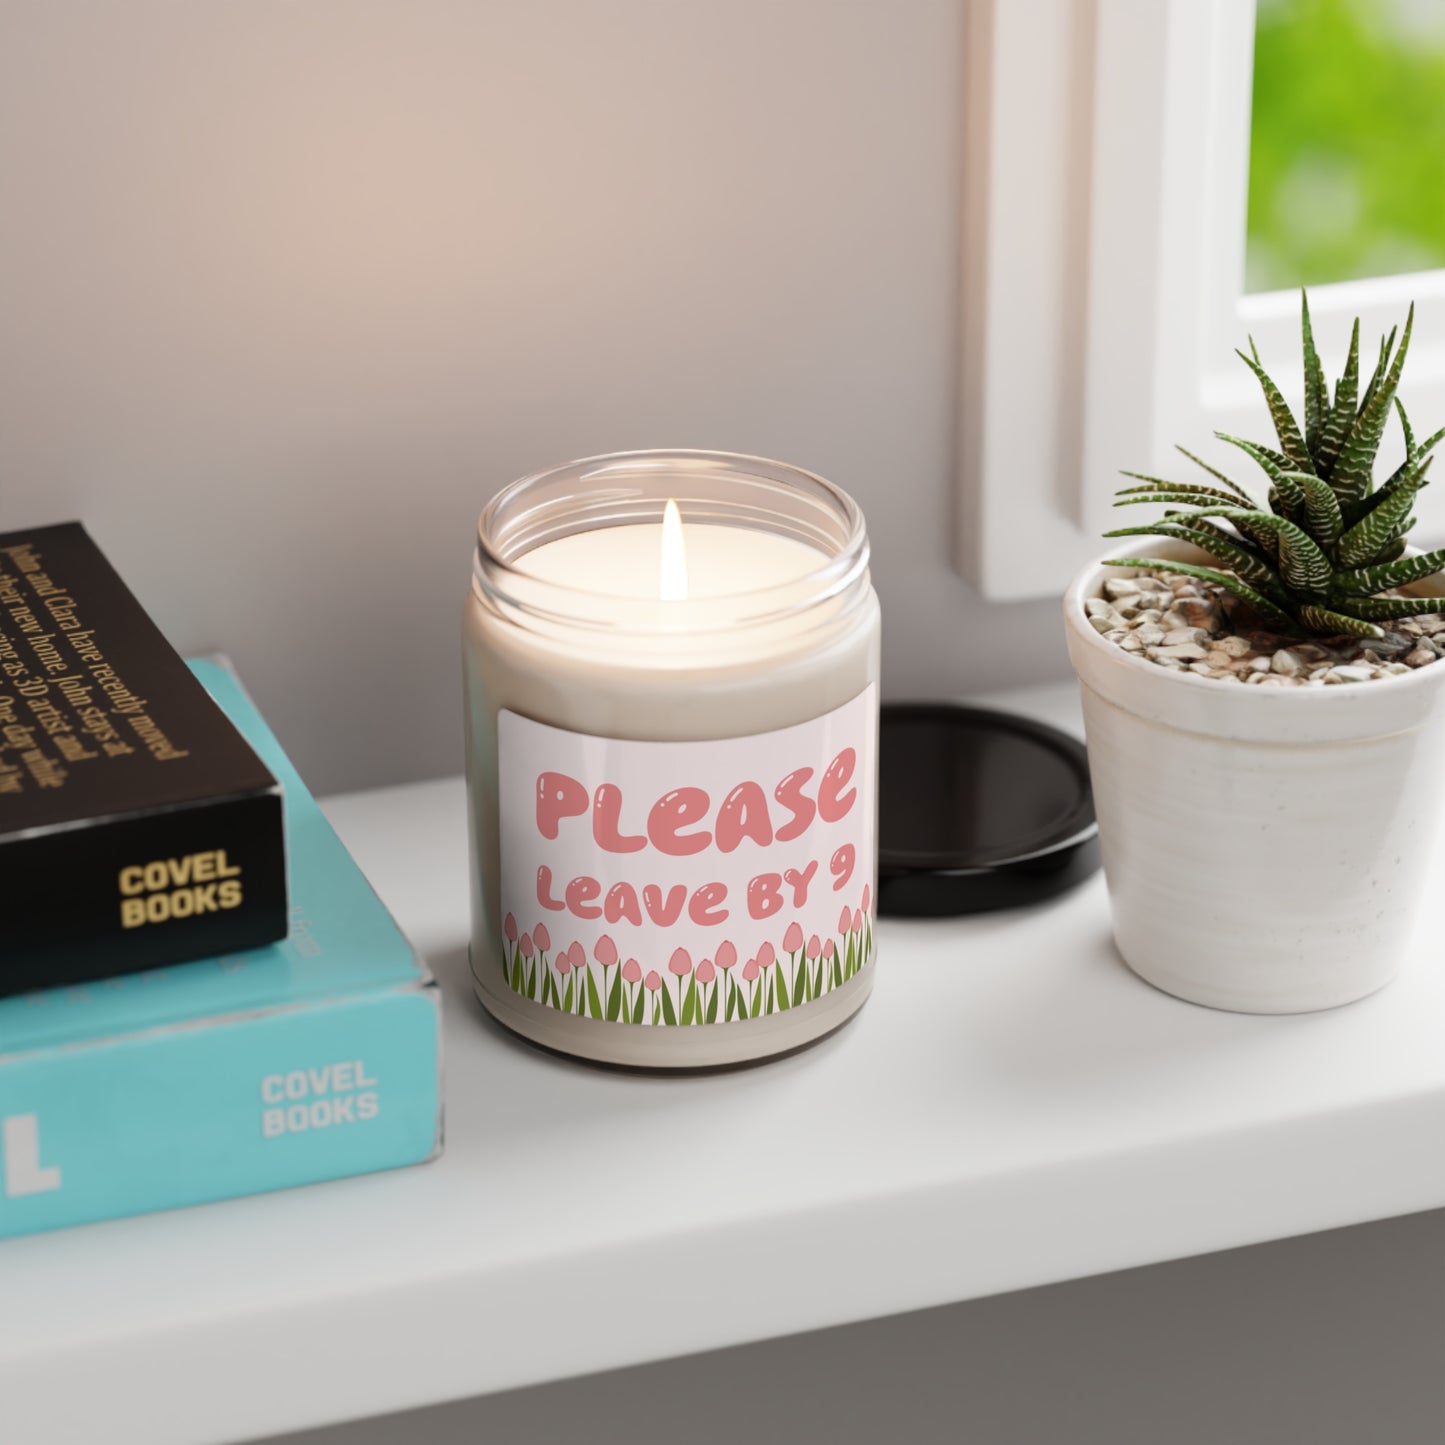 "Please Leave By 9" Scented Soy Candle, 9oz